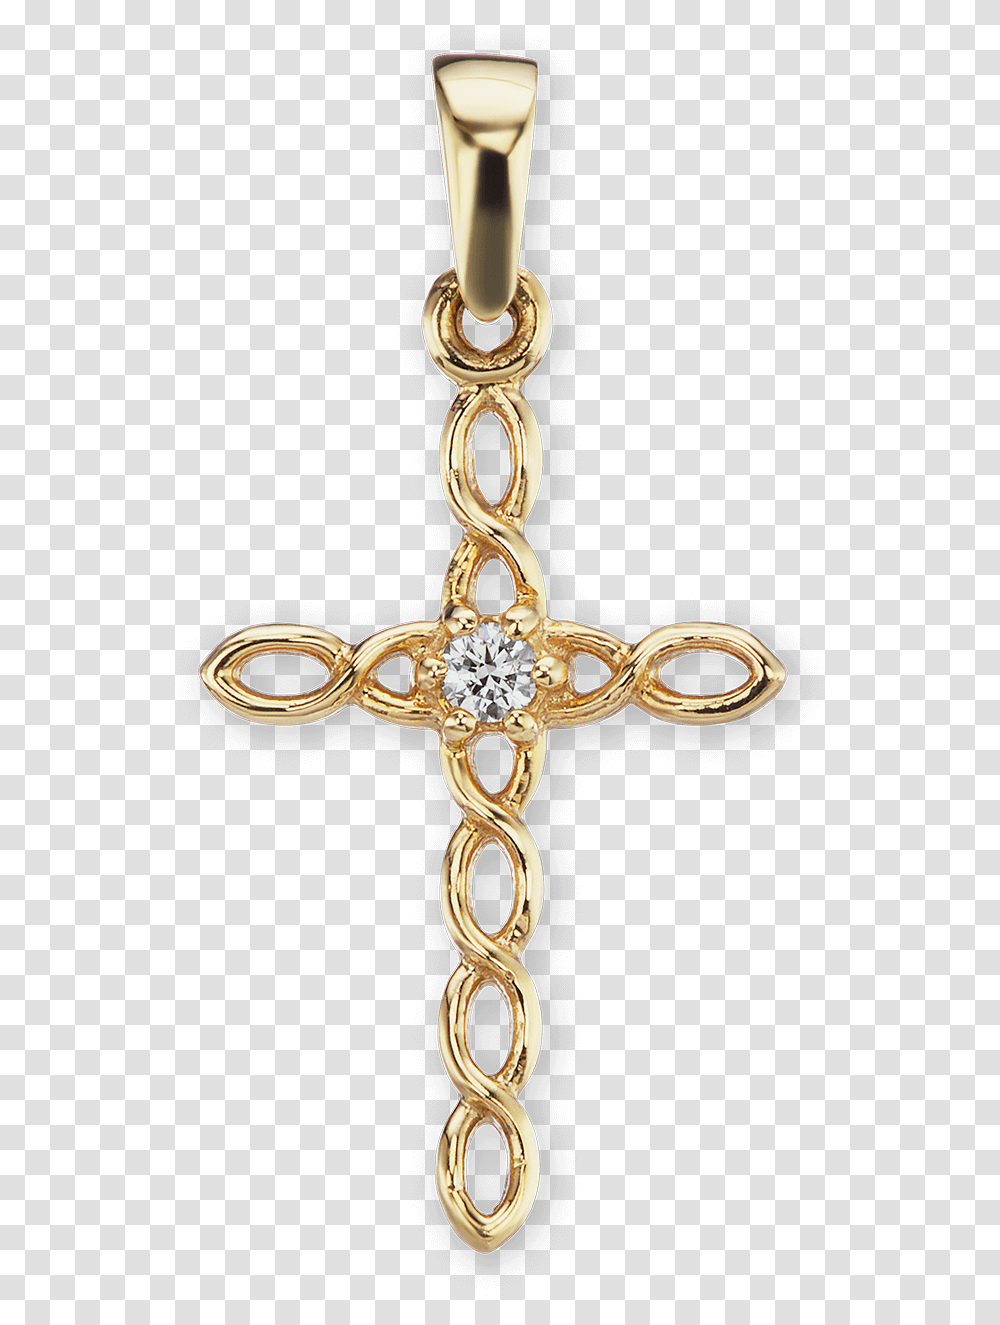 Gold Filigree Cross Pendant With Diamond Roberto Coin Cross Necklace, Crucifix, Gemstone, Jewelry Transparent Png